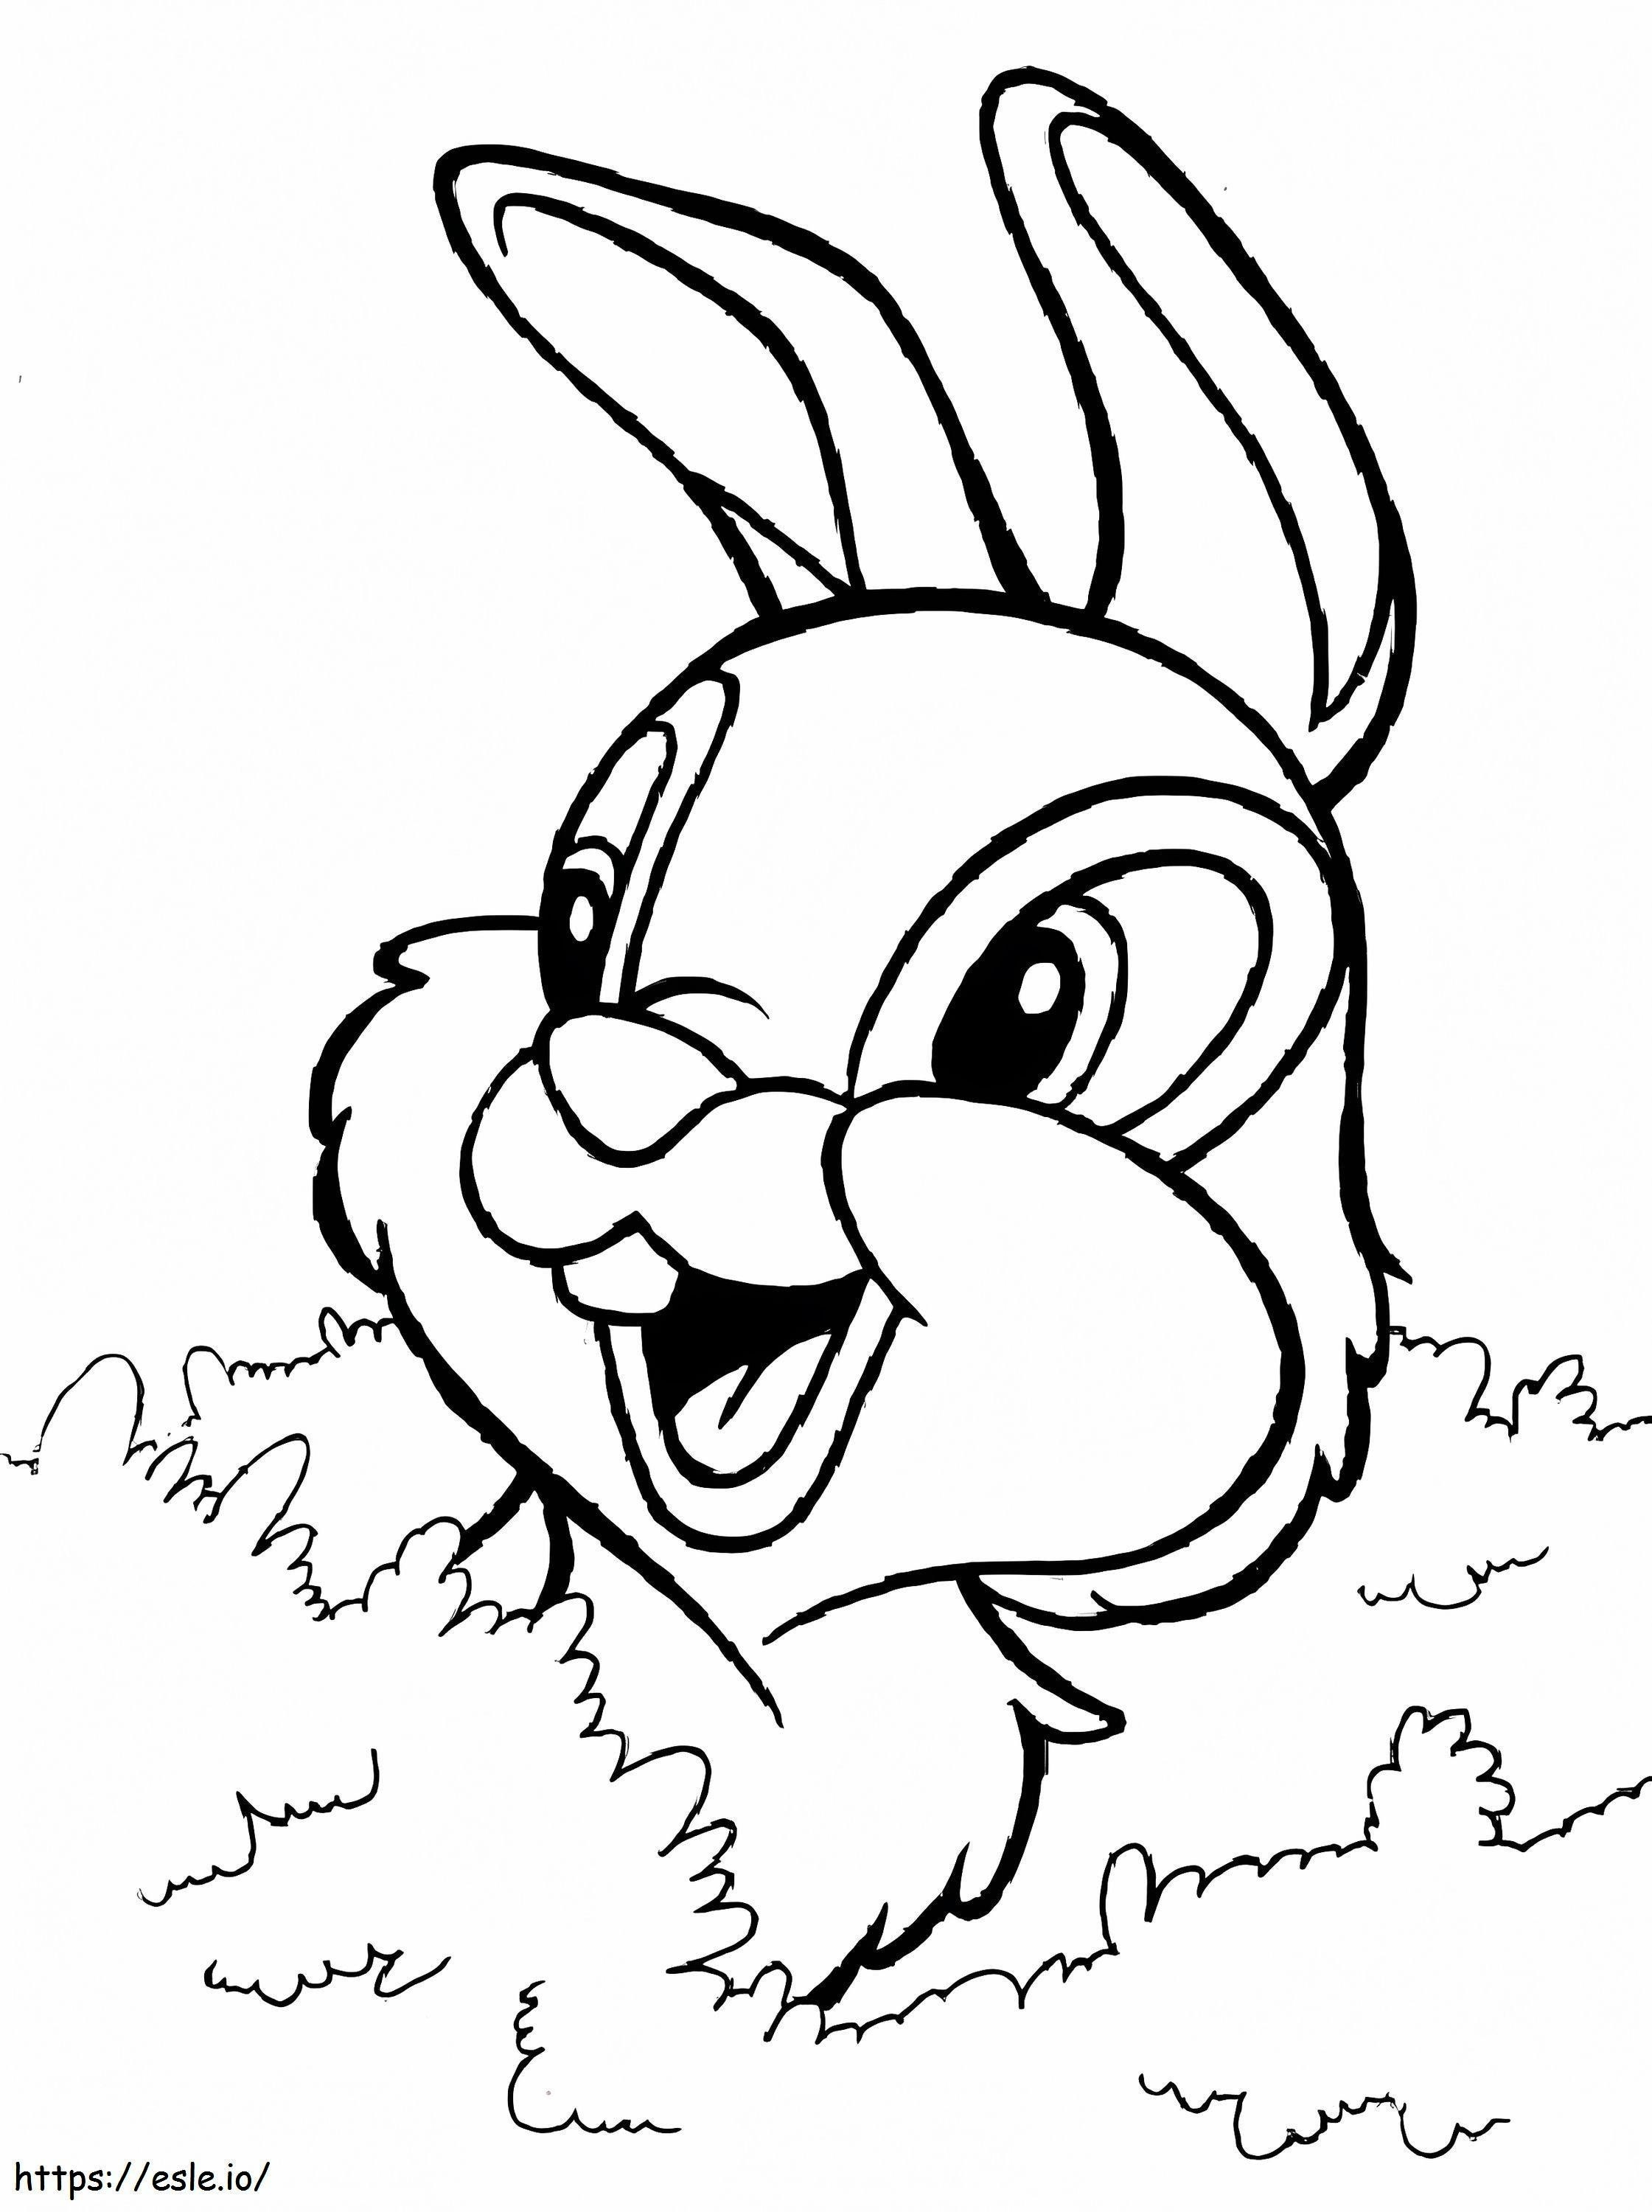 Printable Thumper coloring page